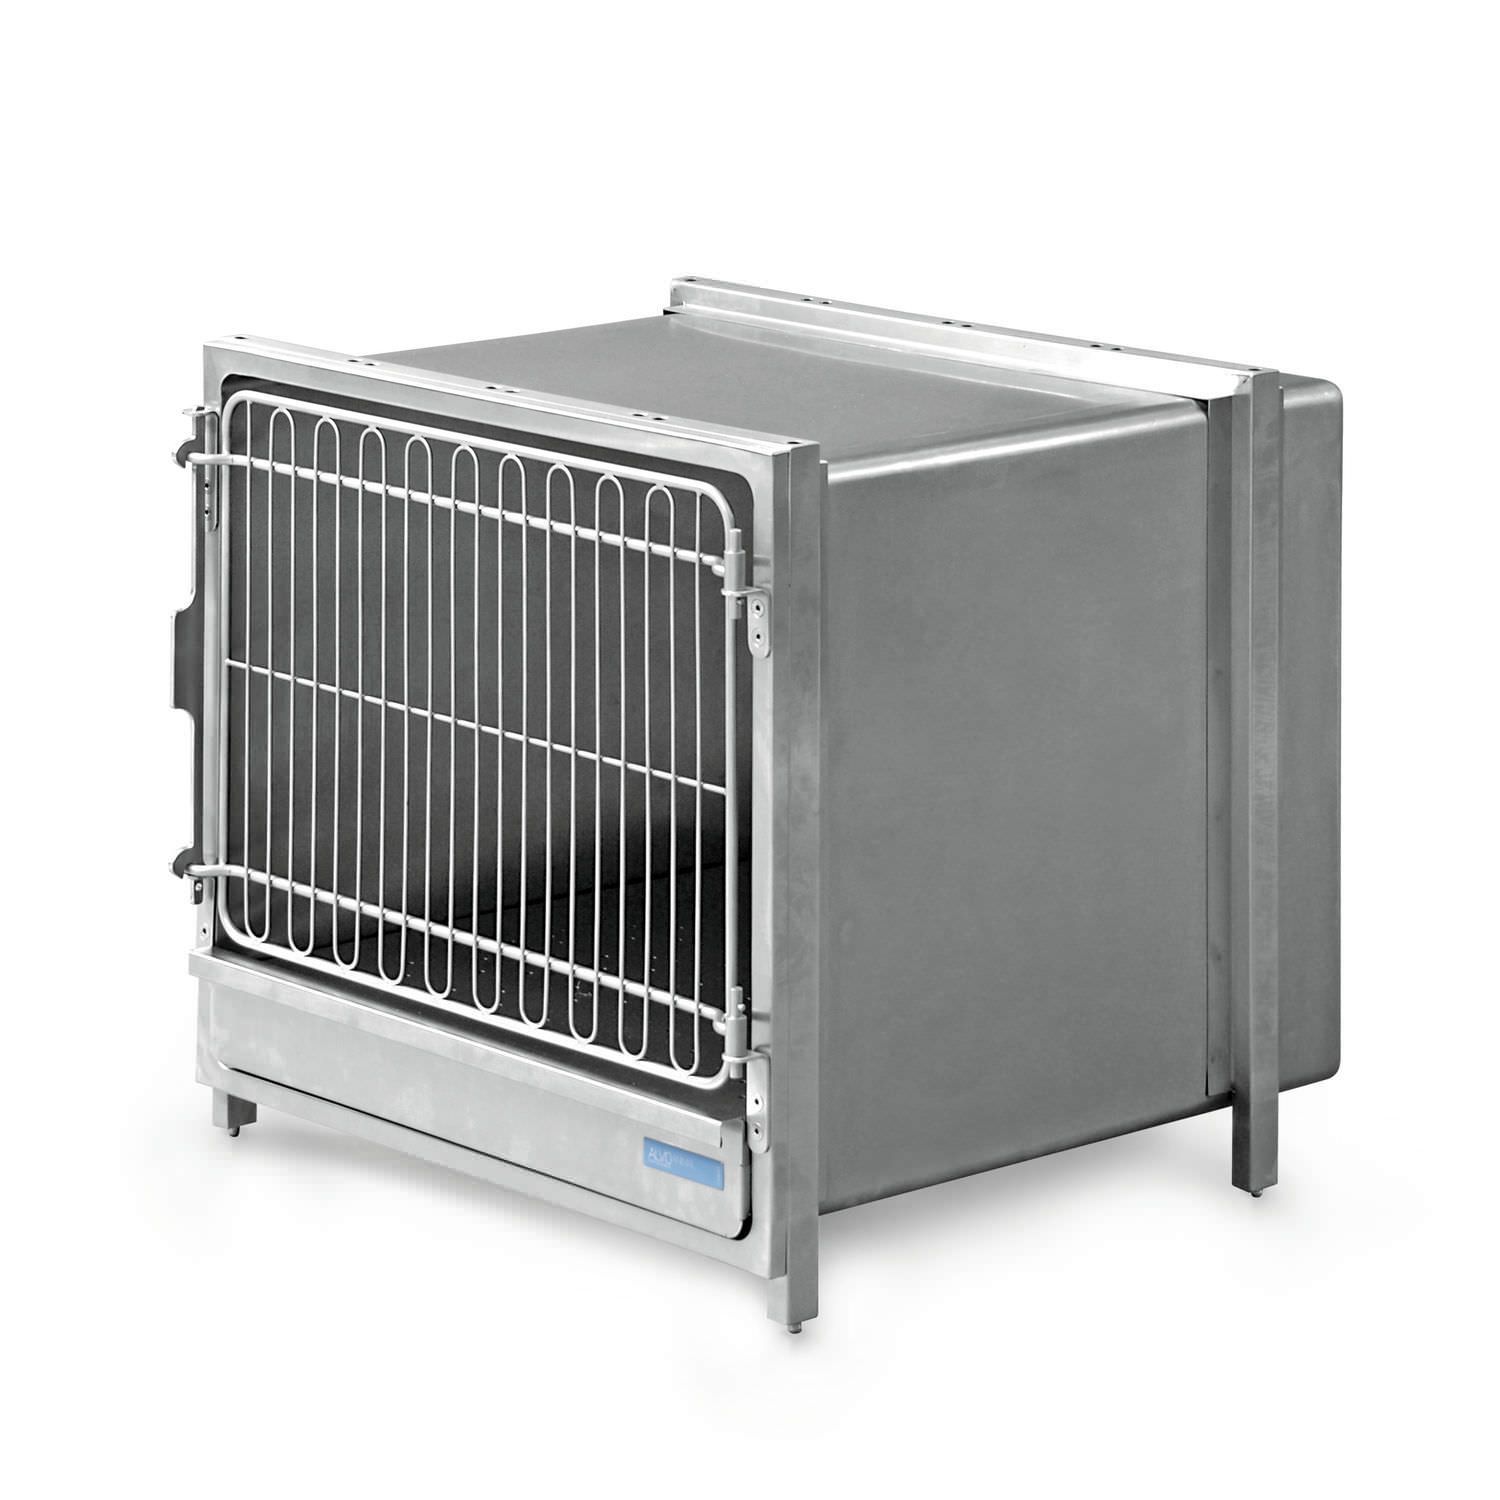 Stainless steel veterinary cage 10-102 ALVO Medical